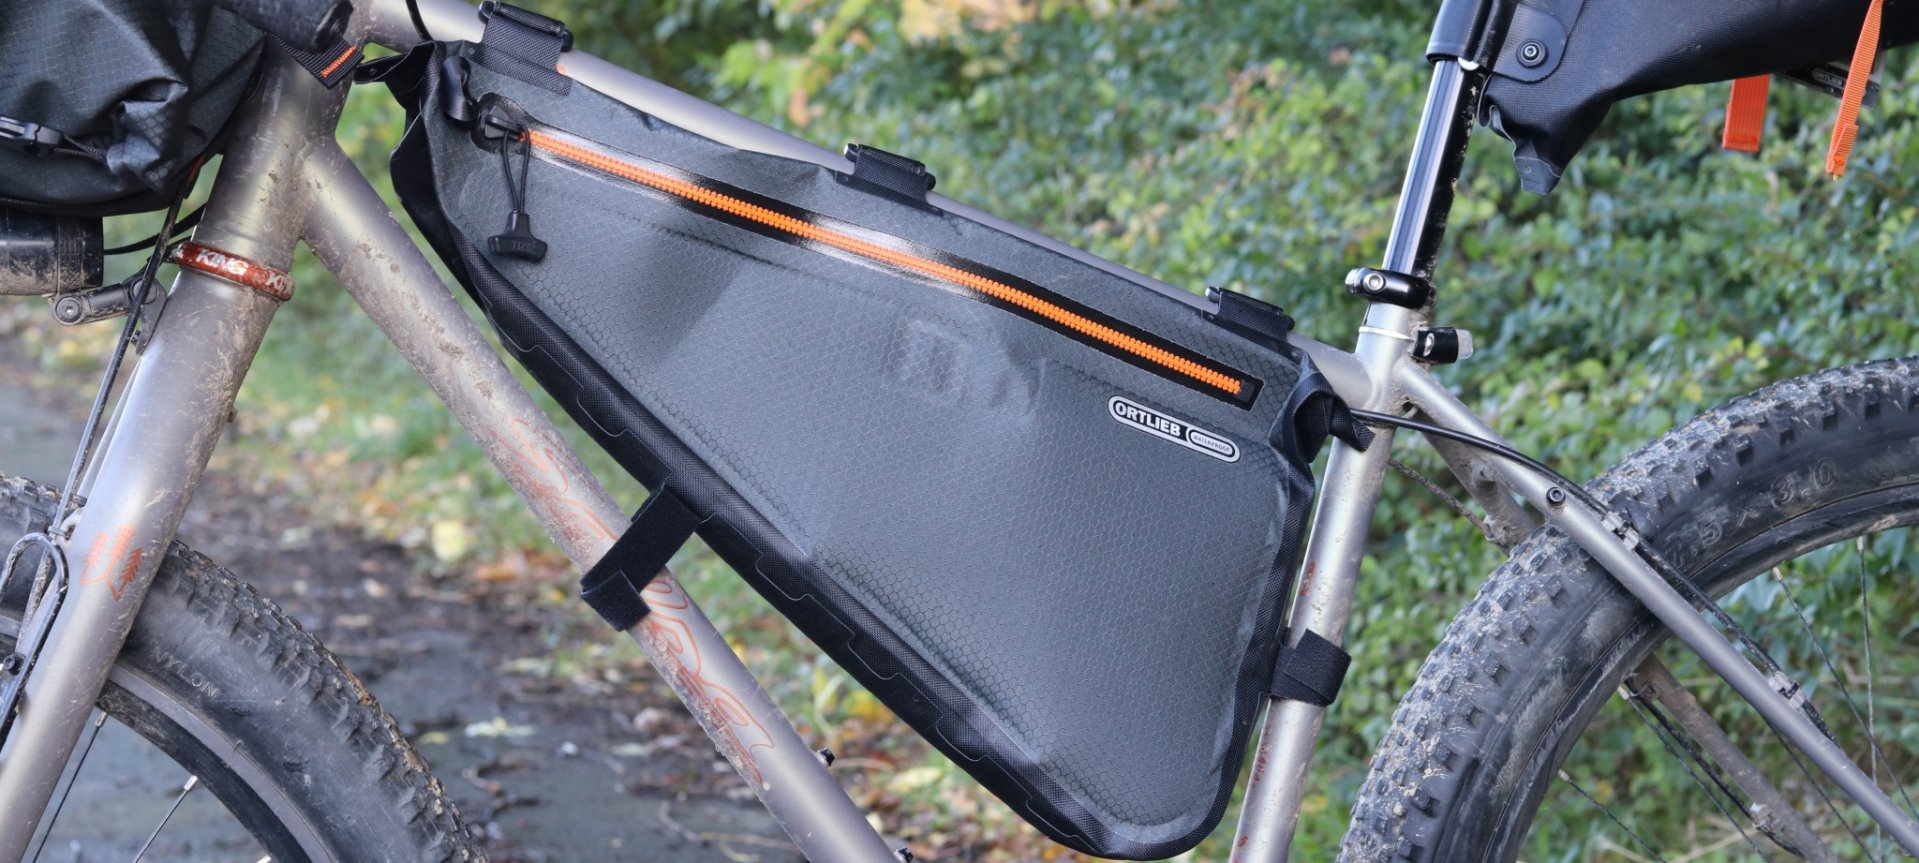 The Frame-Pack is perfect for storing the heavy stuff.